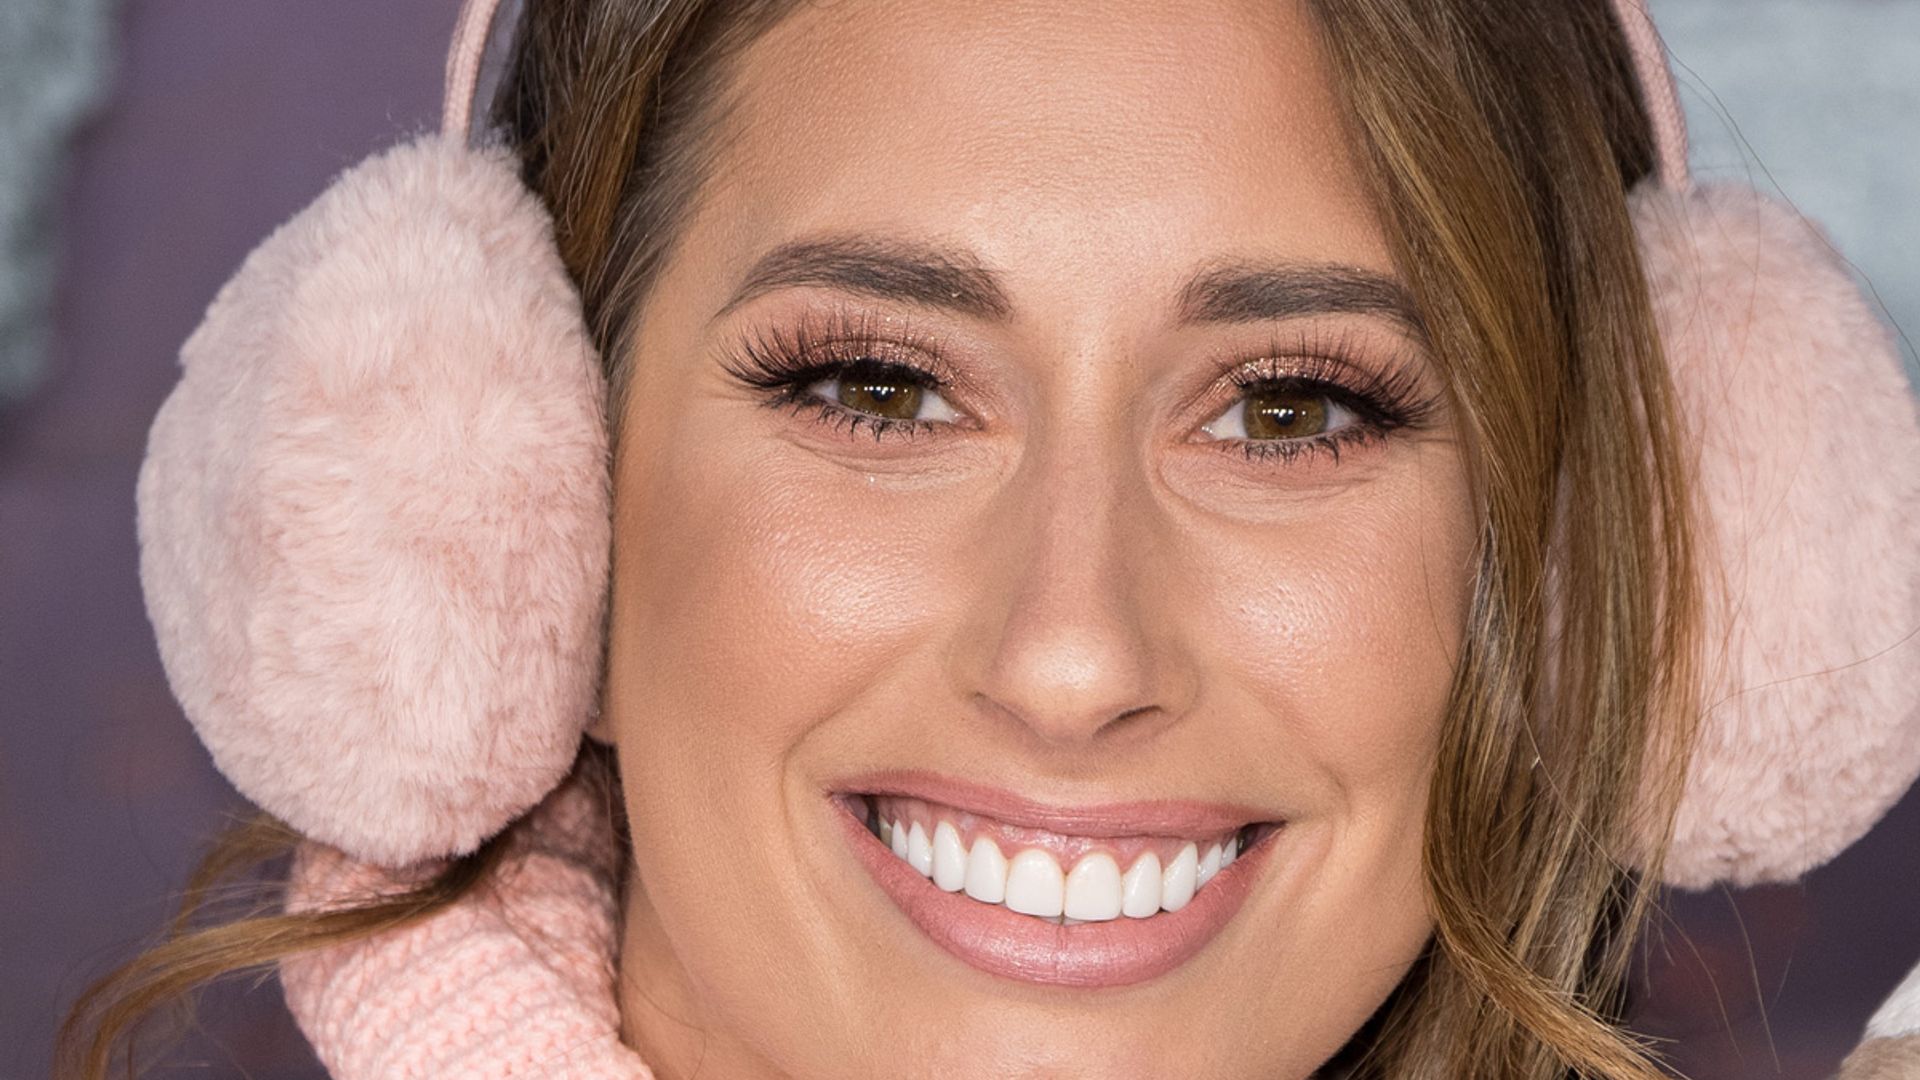 stacey solomon wearing pink